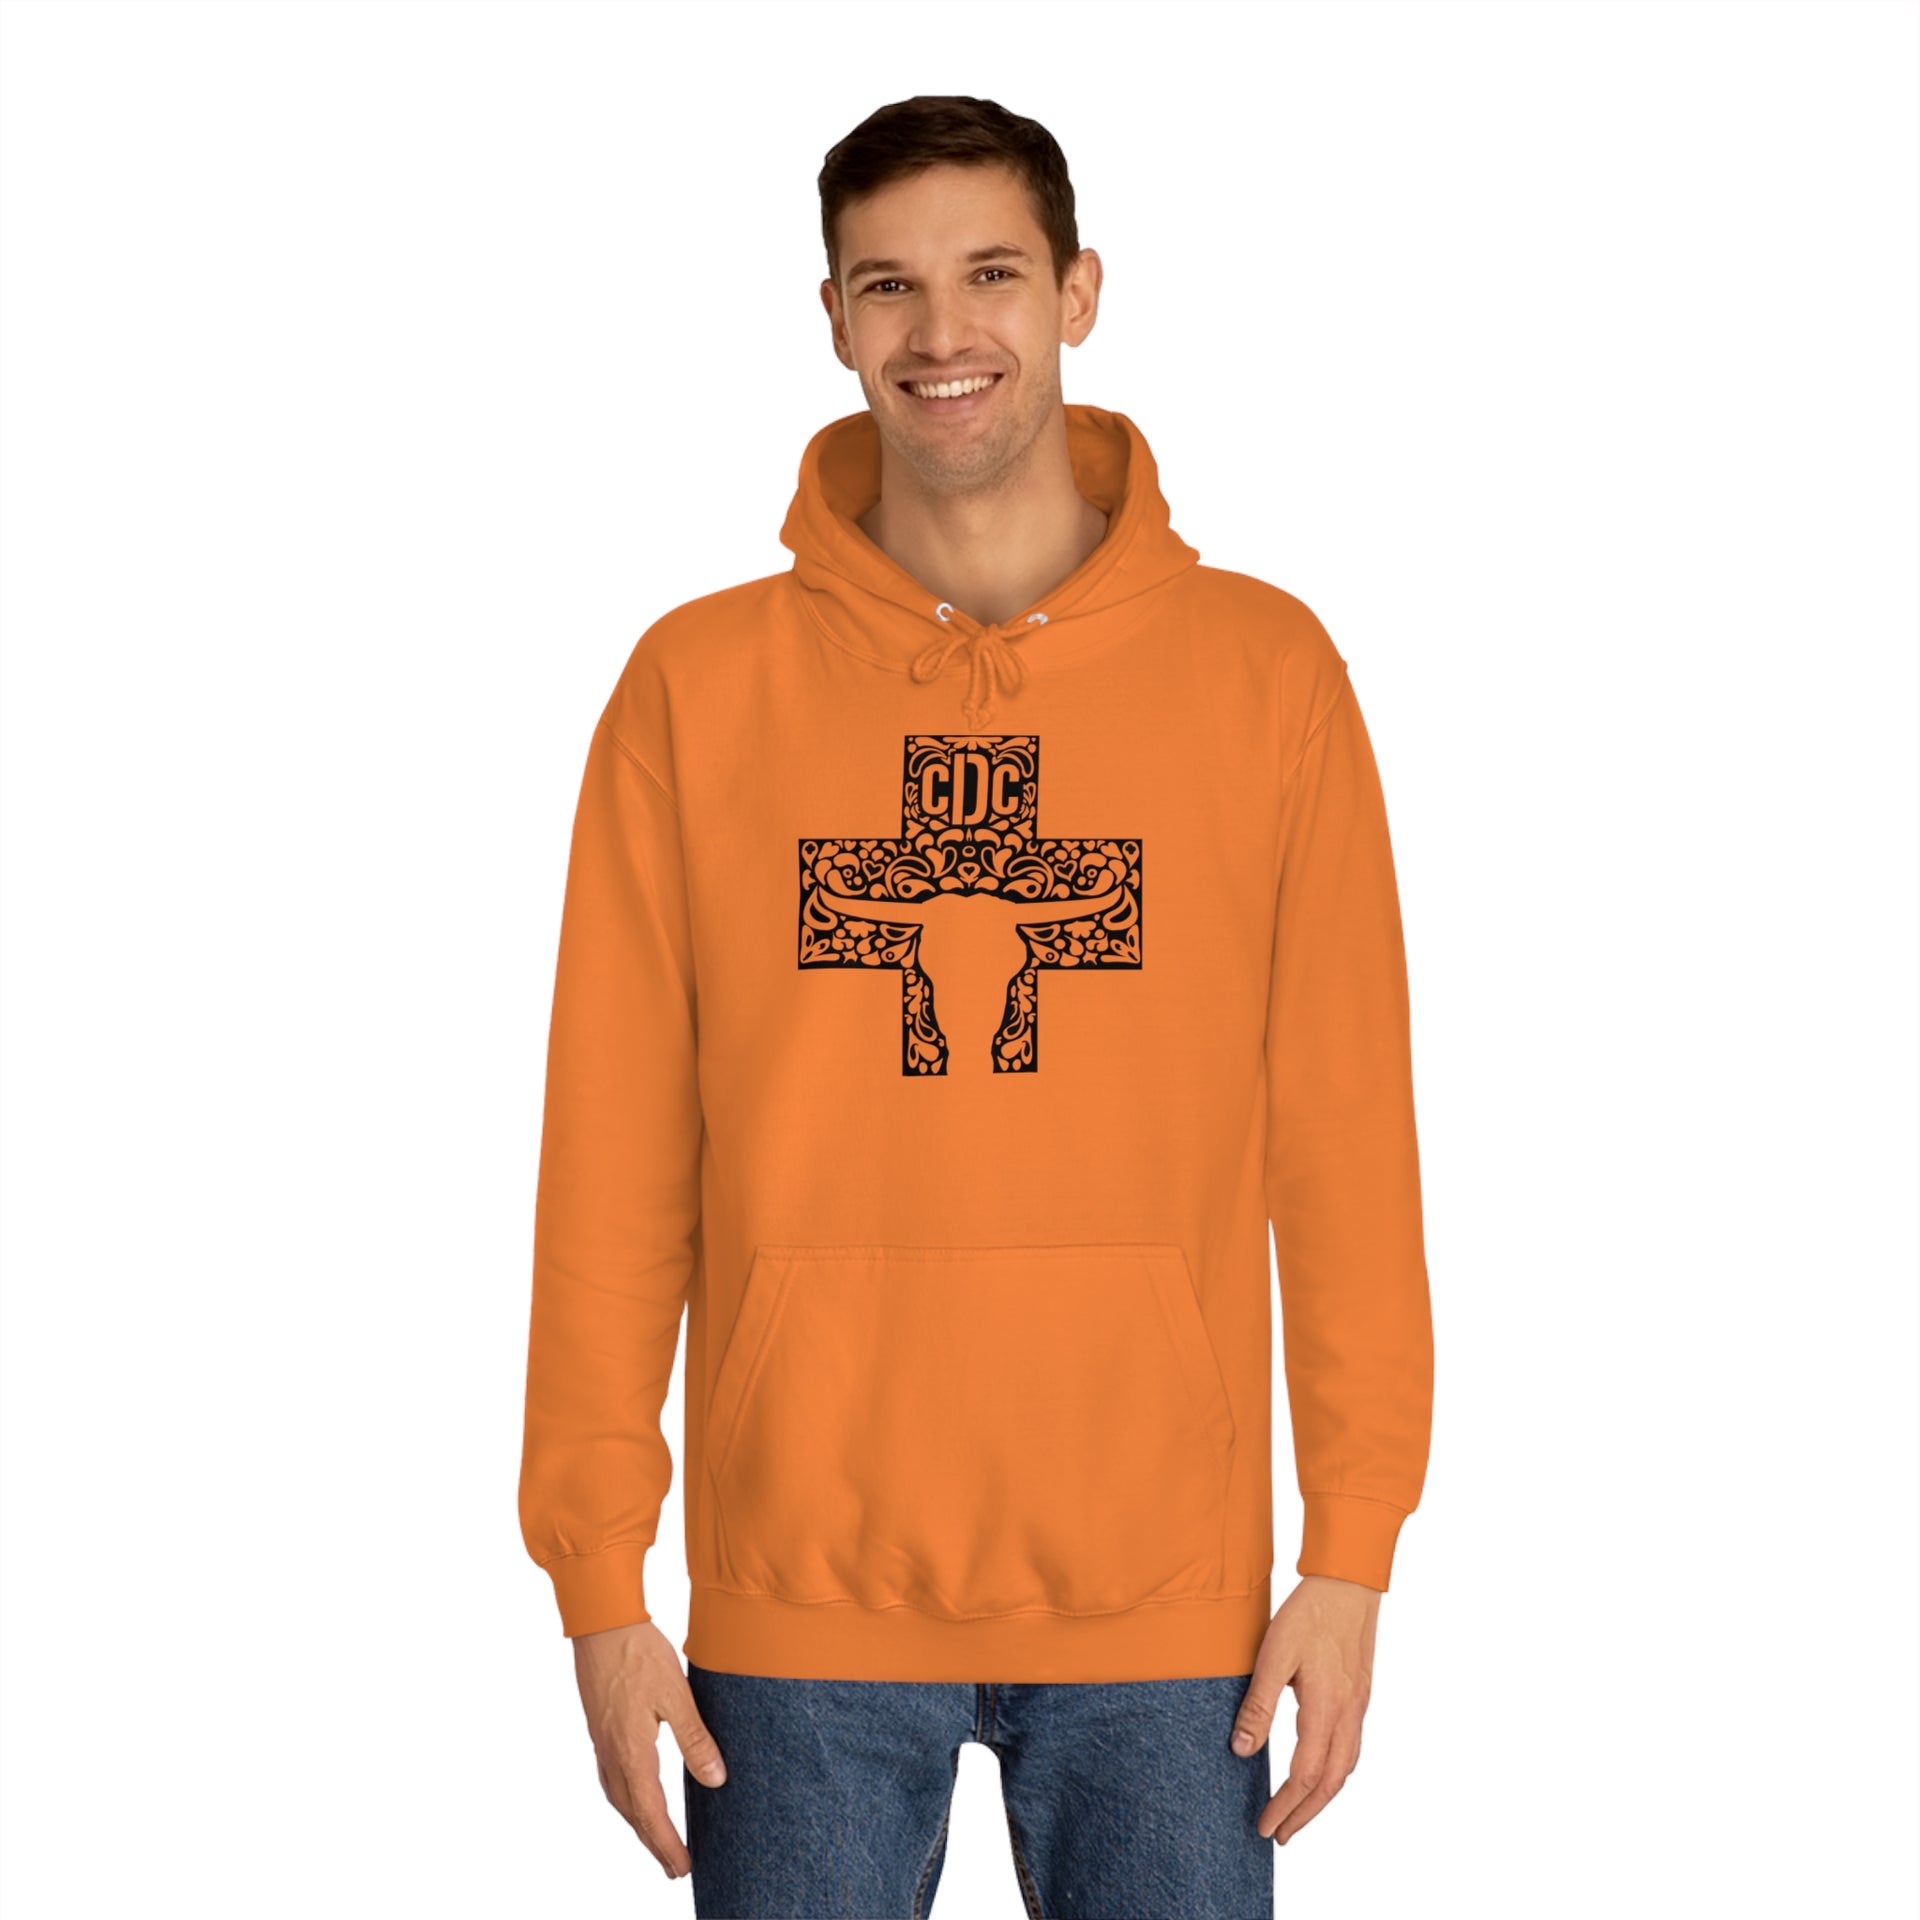 Lacy cDc unisex College Hoodie